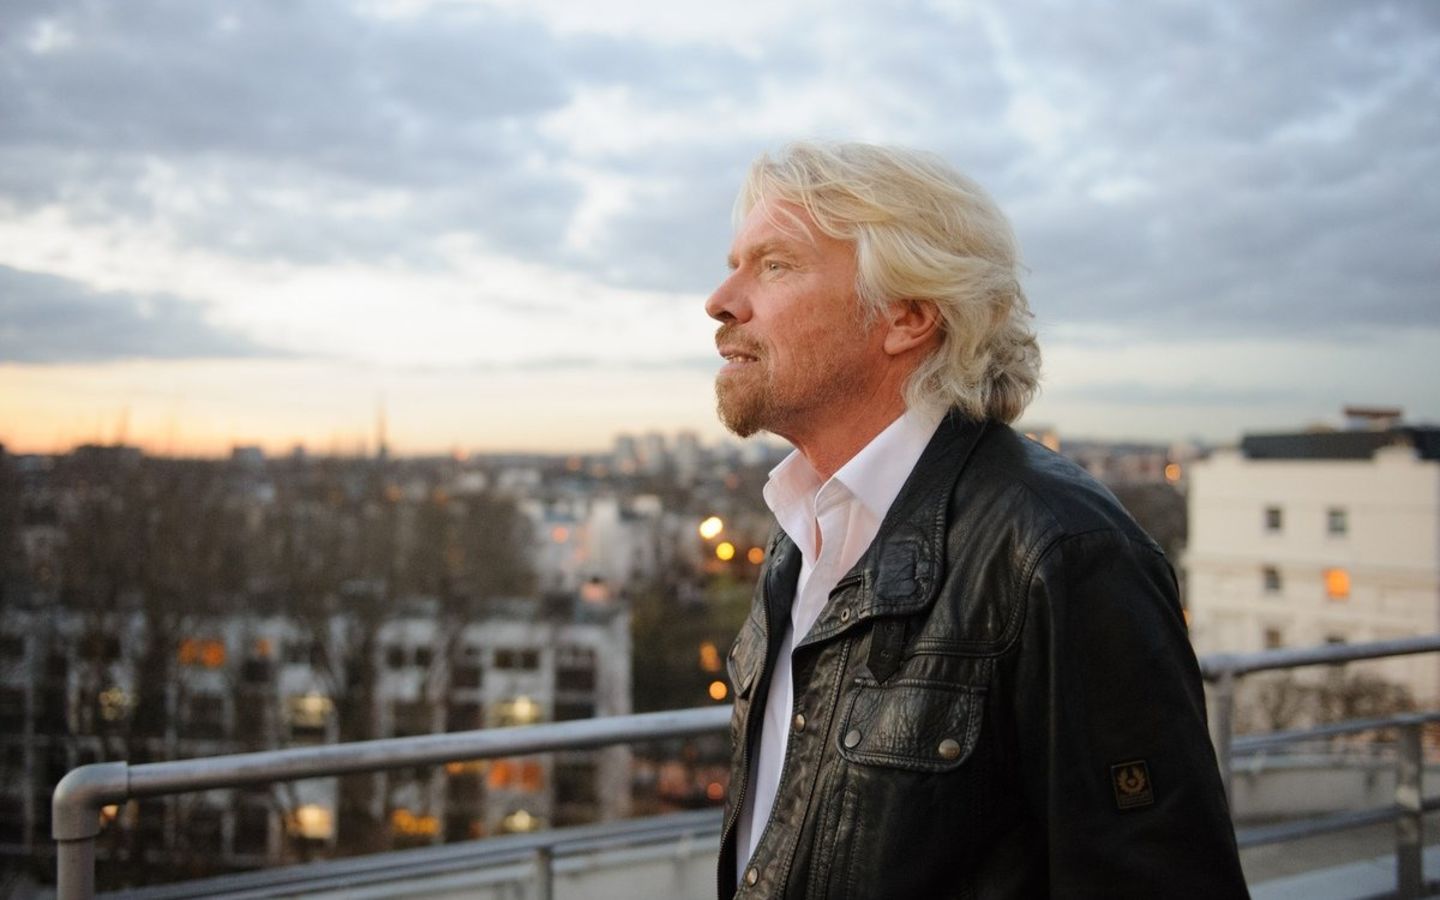 Richard Branson looking into the distance at sunset